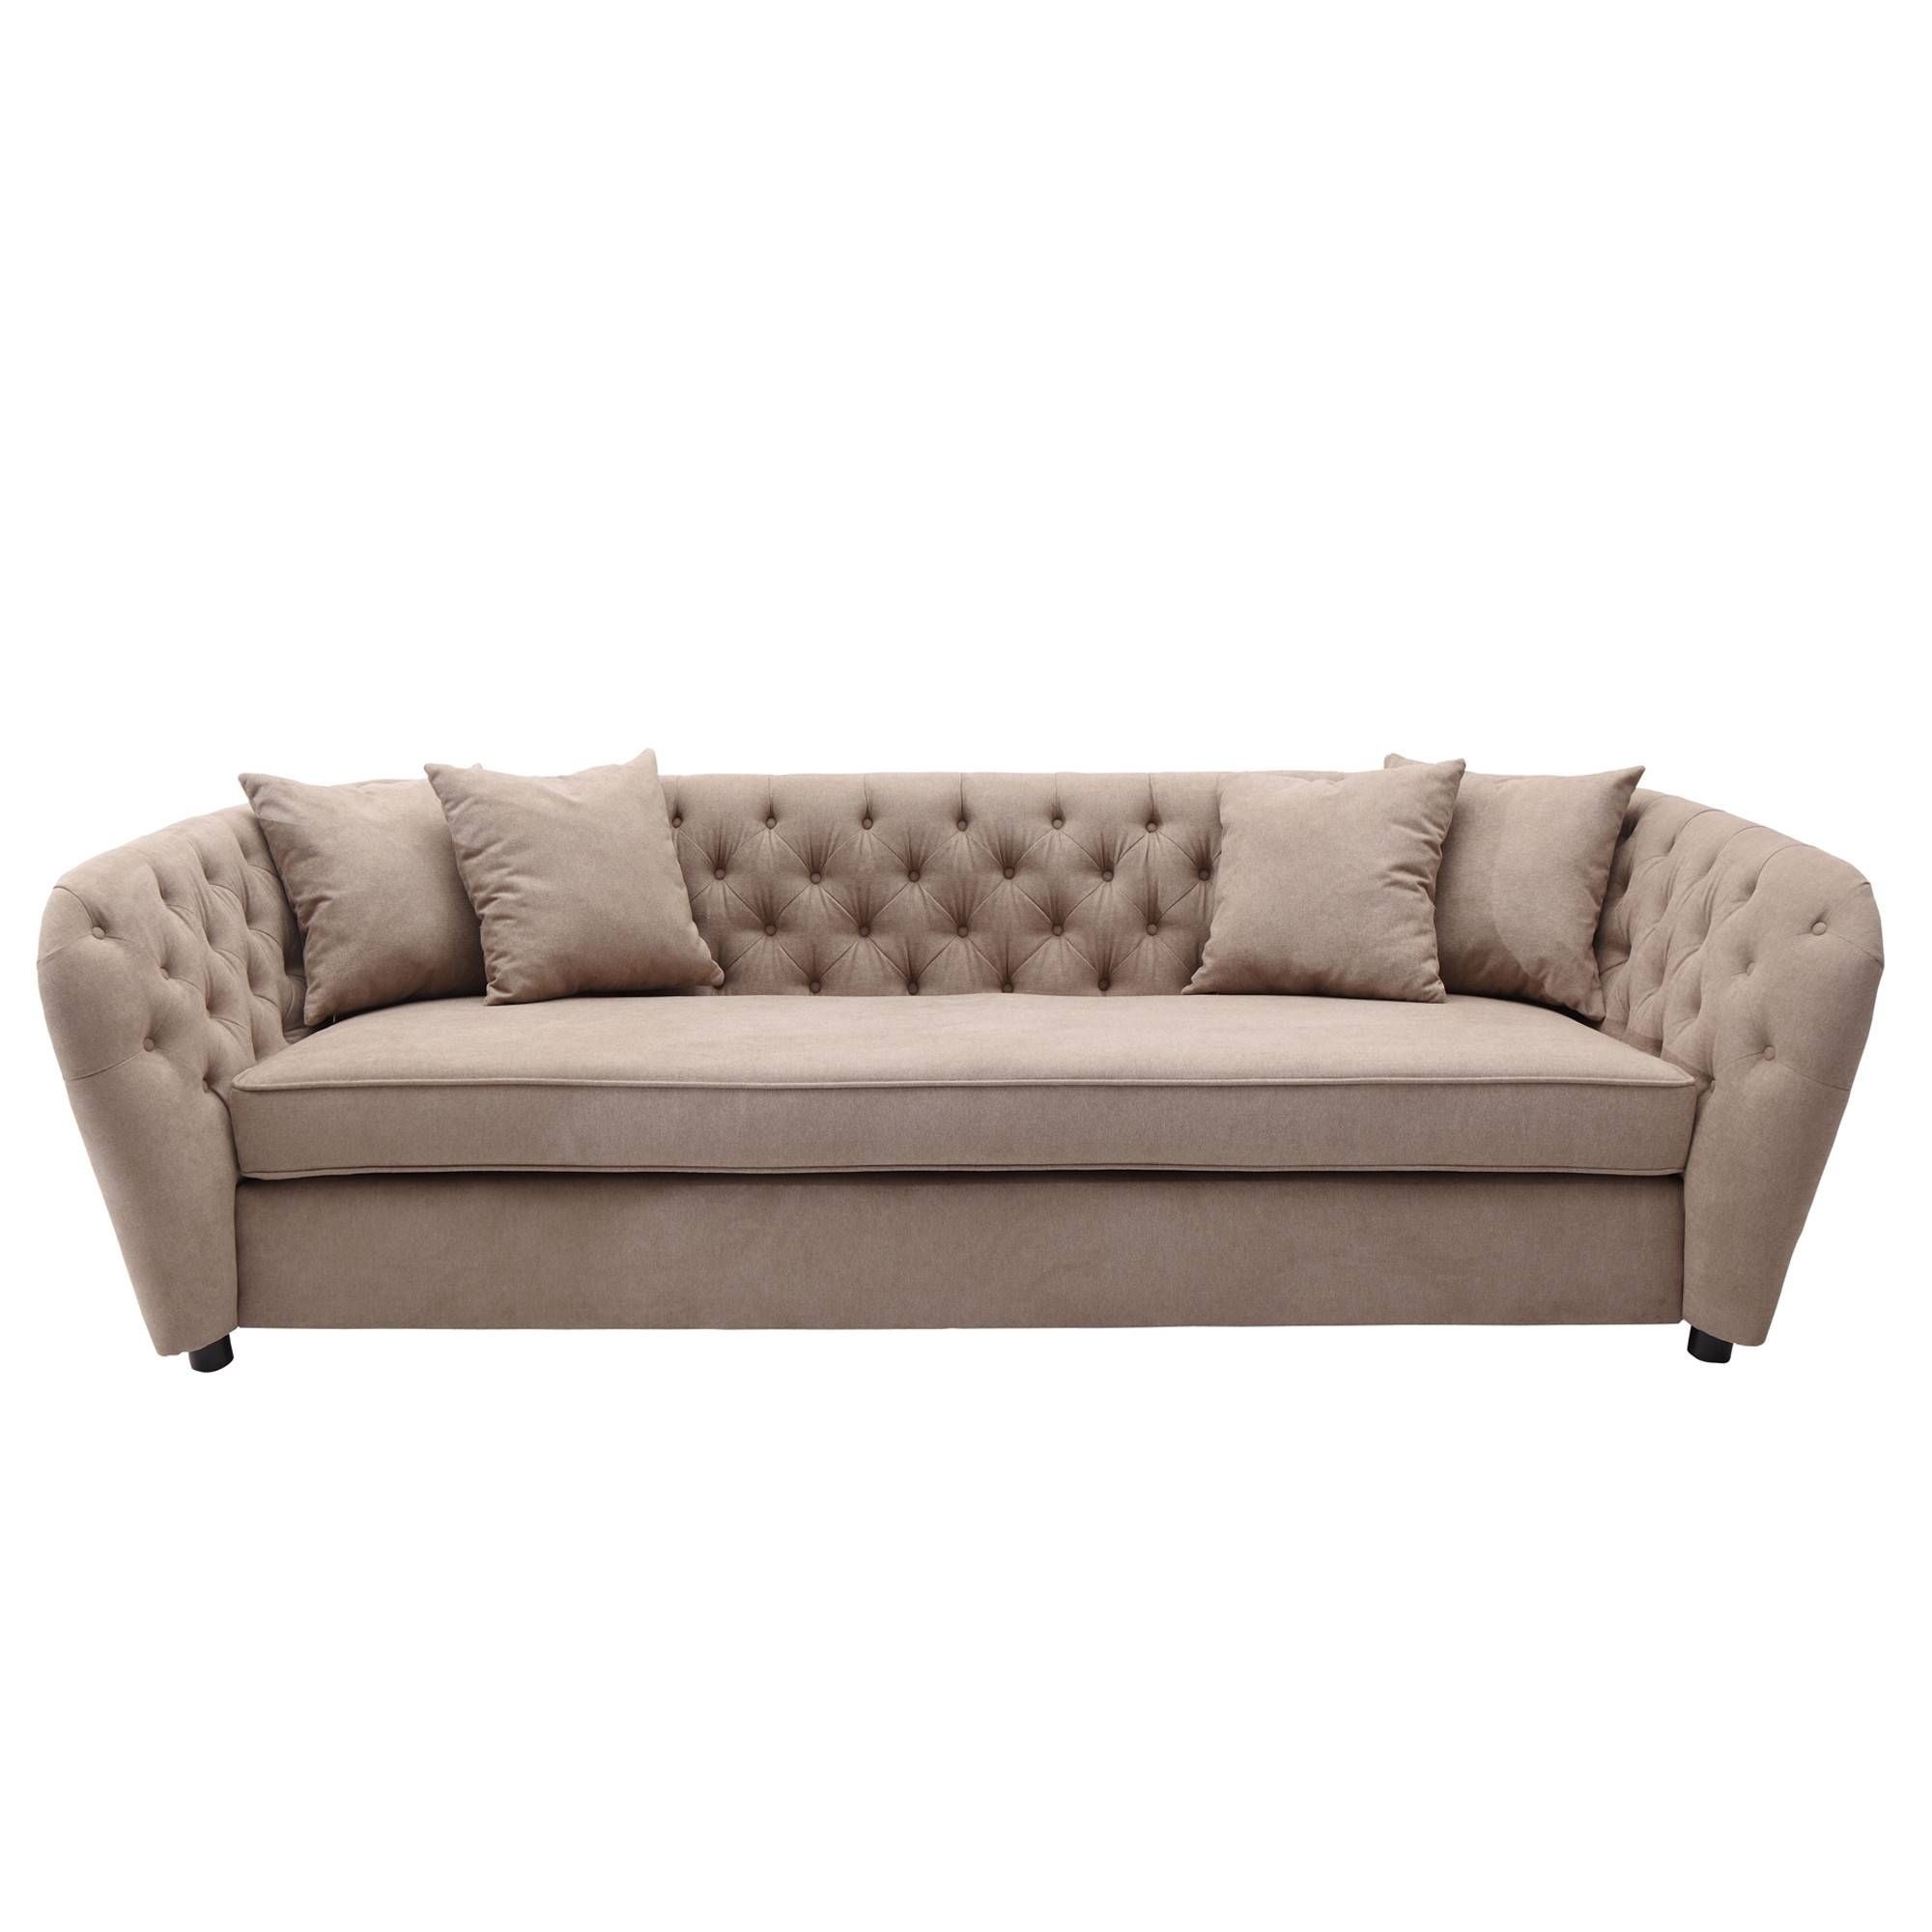 Sofas Canterbury – Leather Sectional Sofa Inside Canterbury Leather Sofas (View 7 of 30)